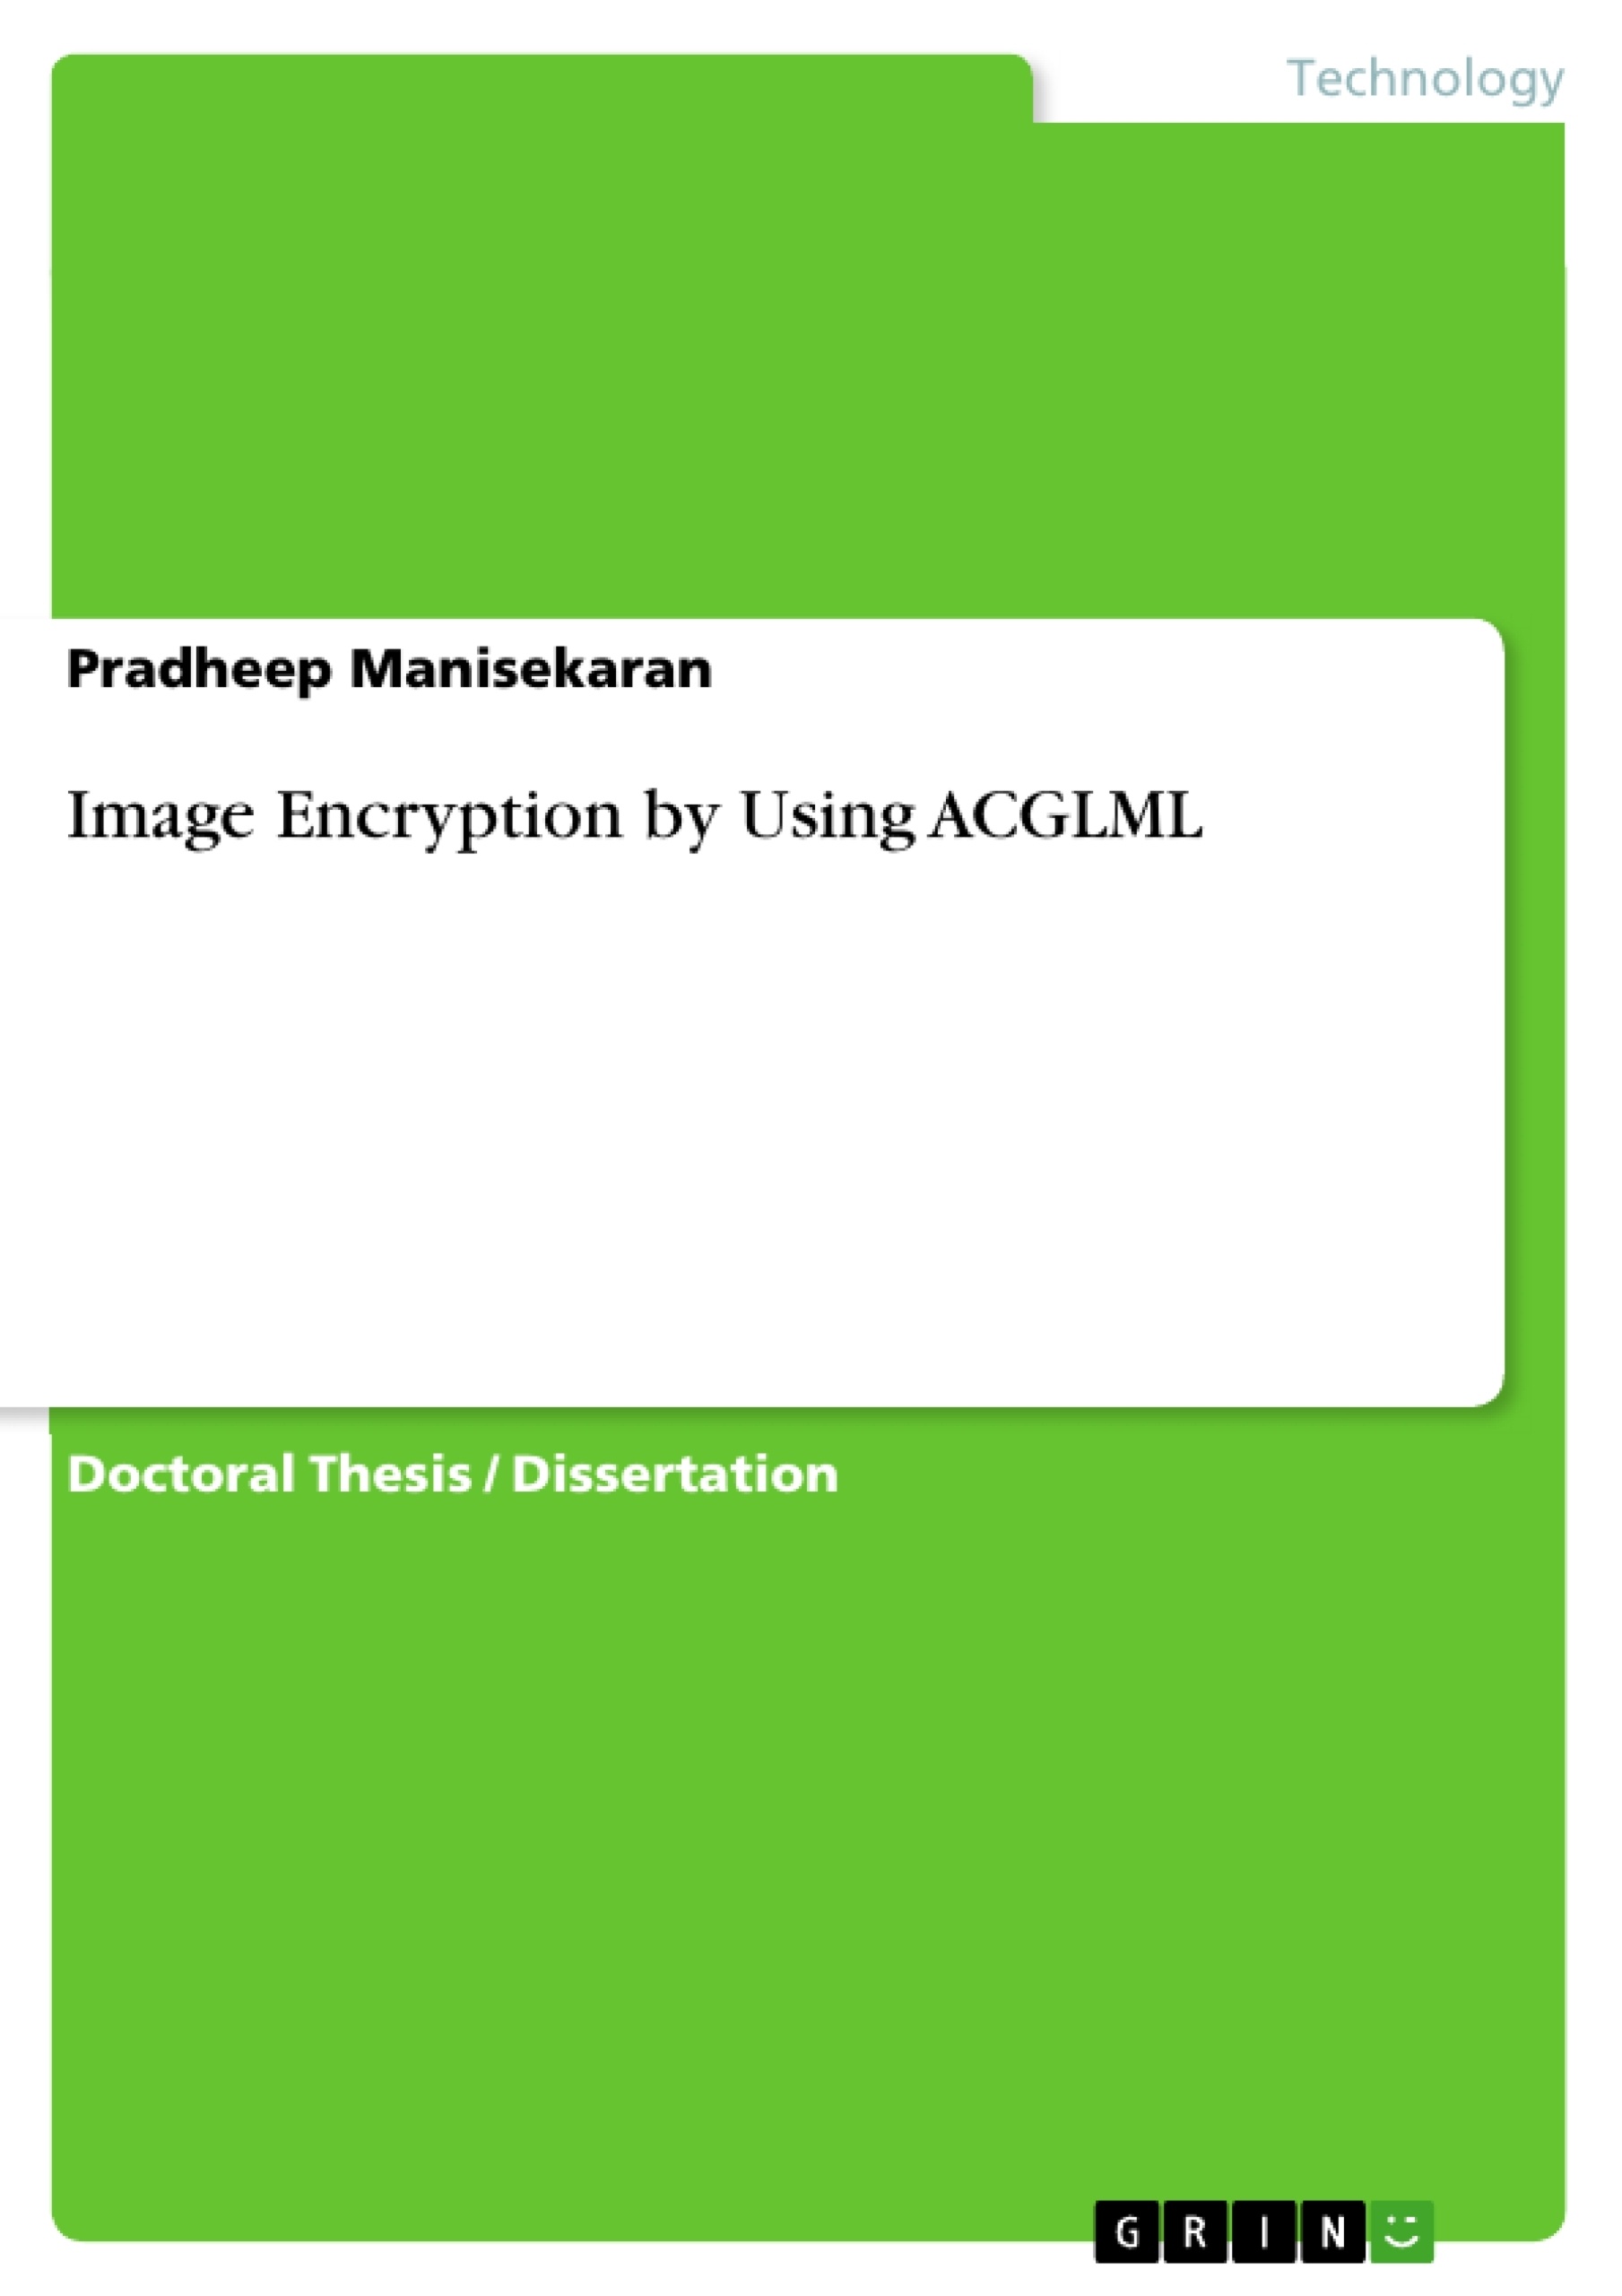 Title: Image Encryption by Using ACGLML